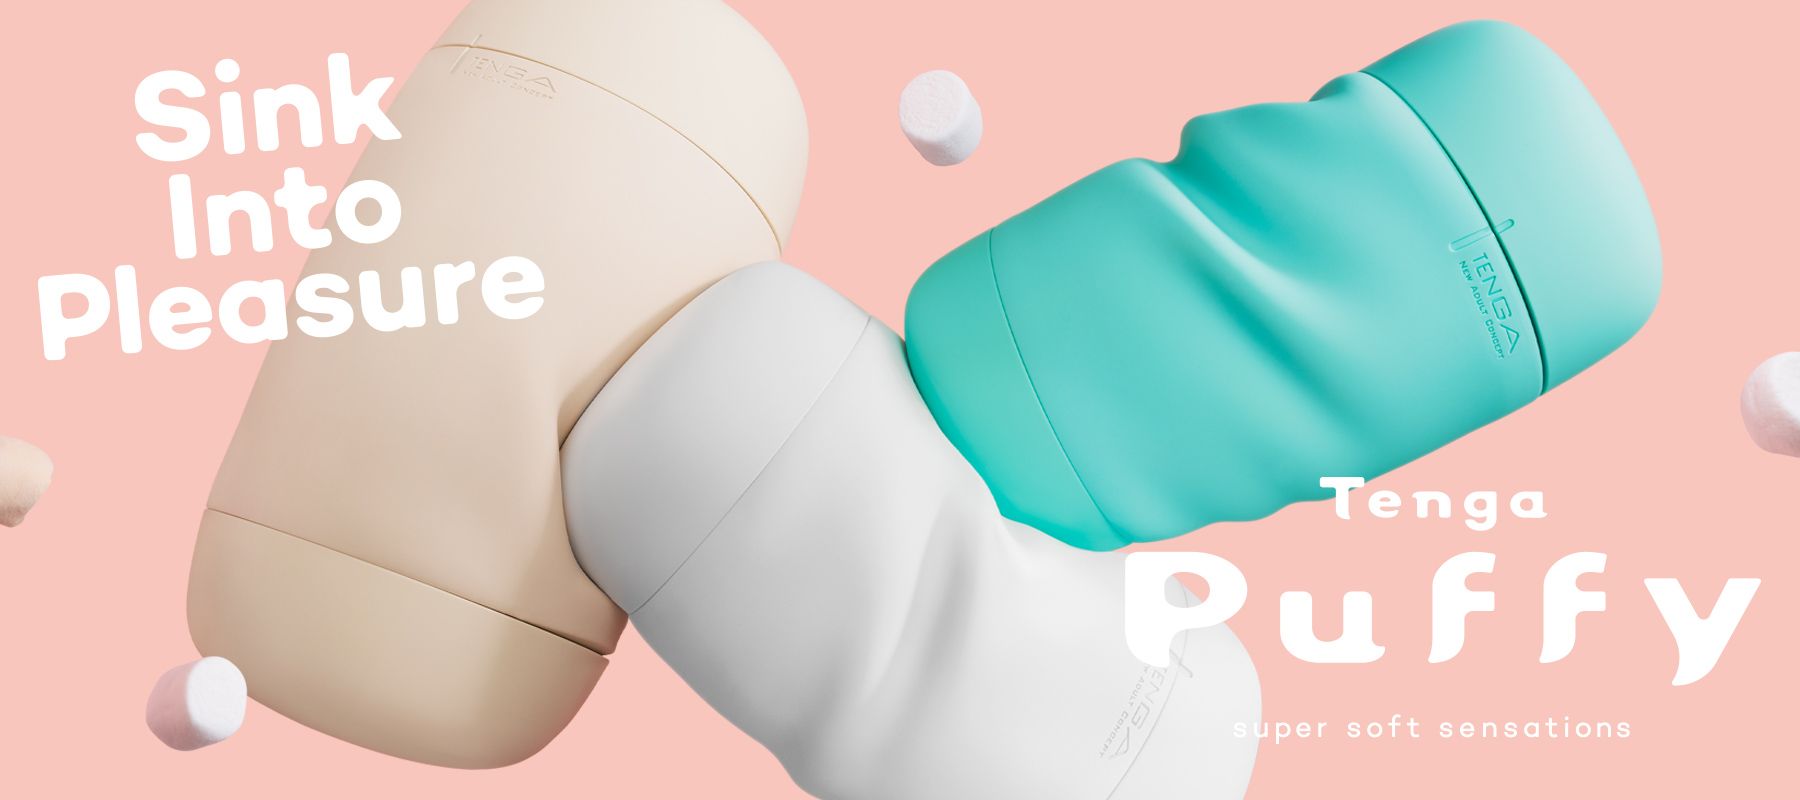 sink into pleasure with Puffy